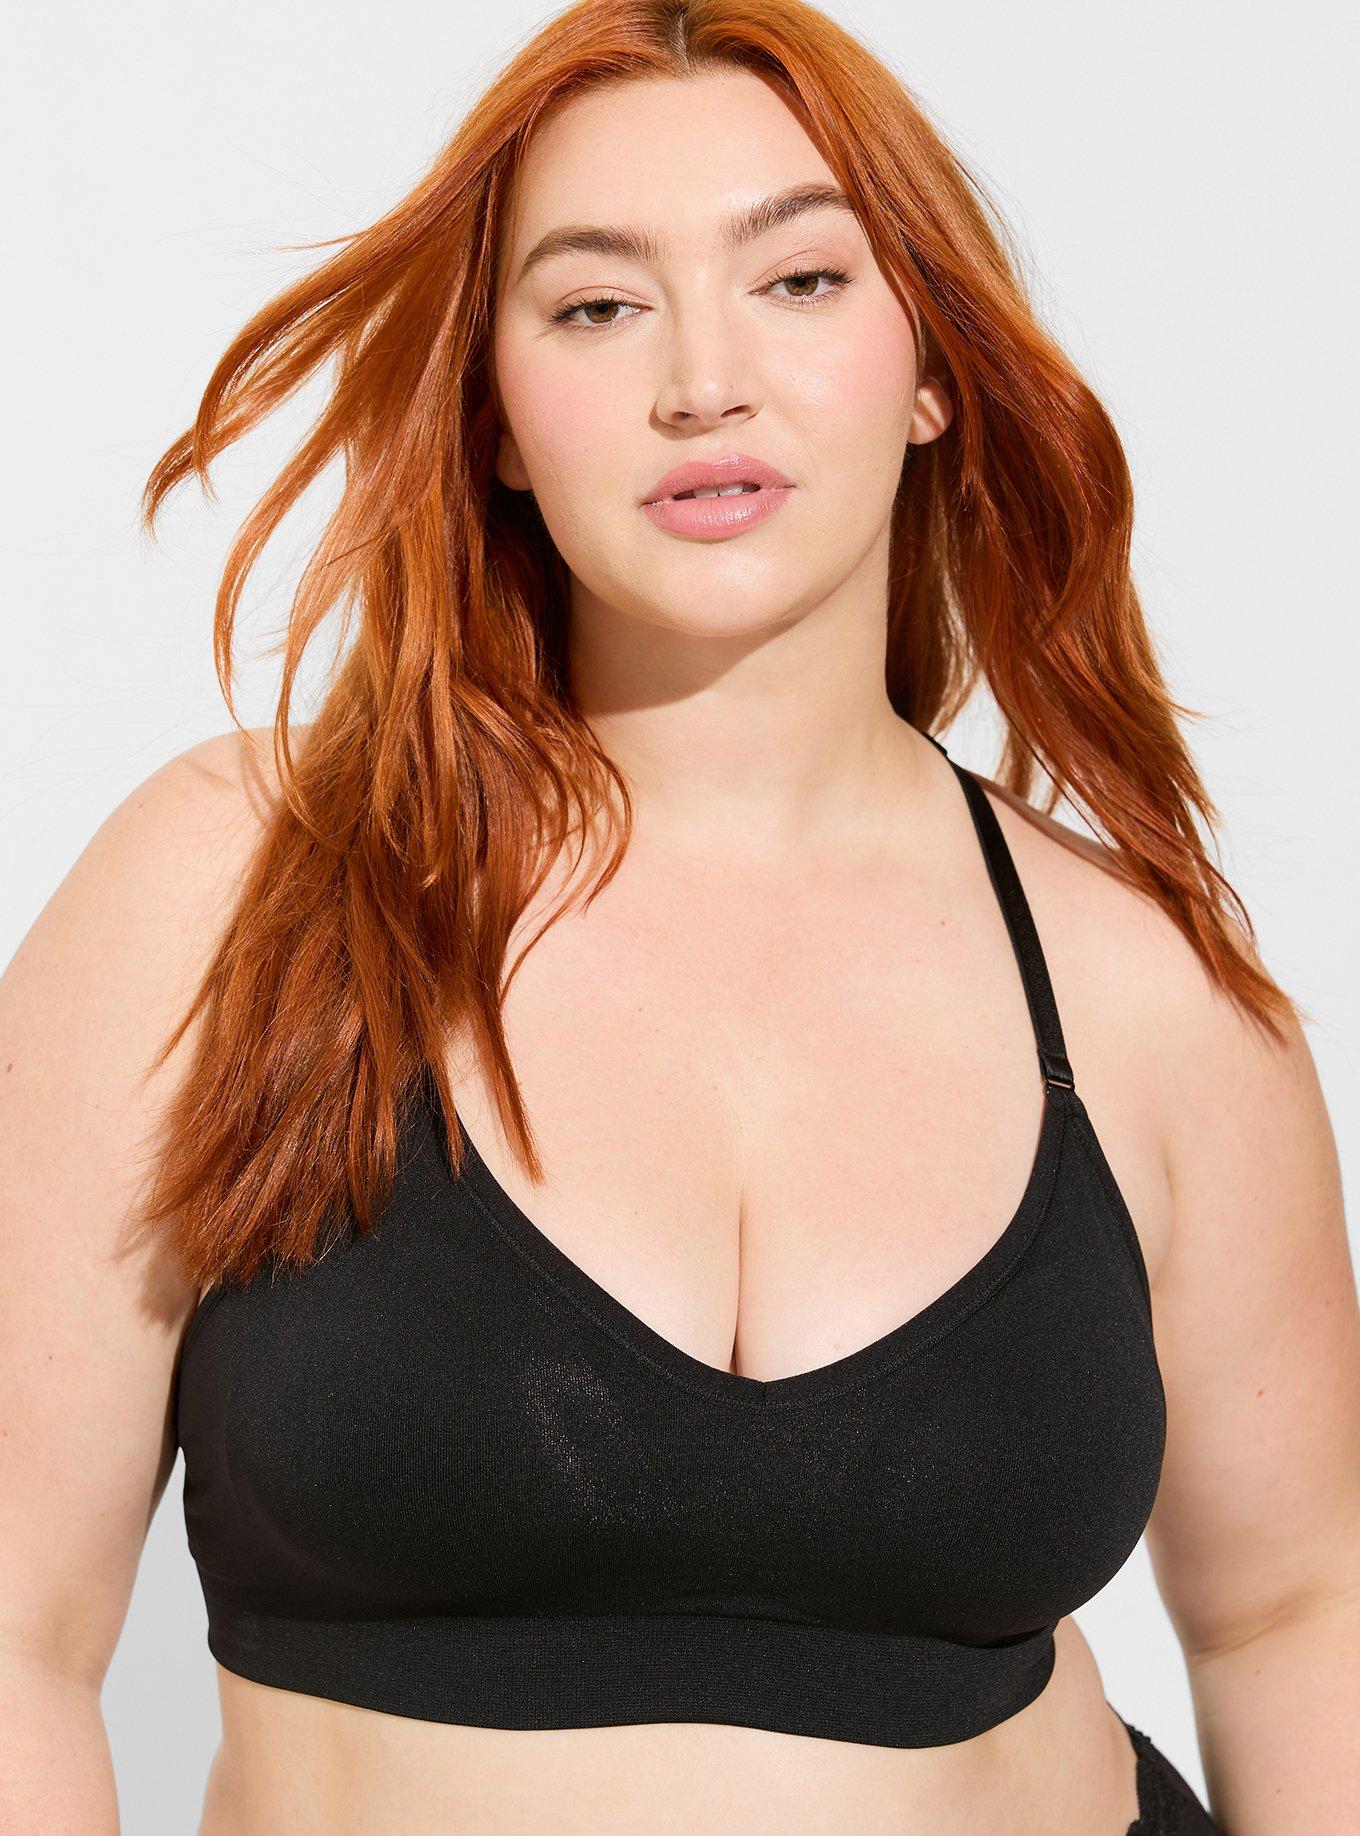 Plus Size - Studs And Lace Bralette - Torrid